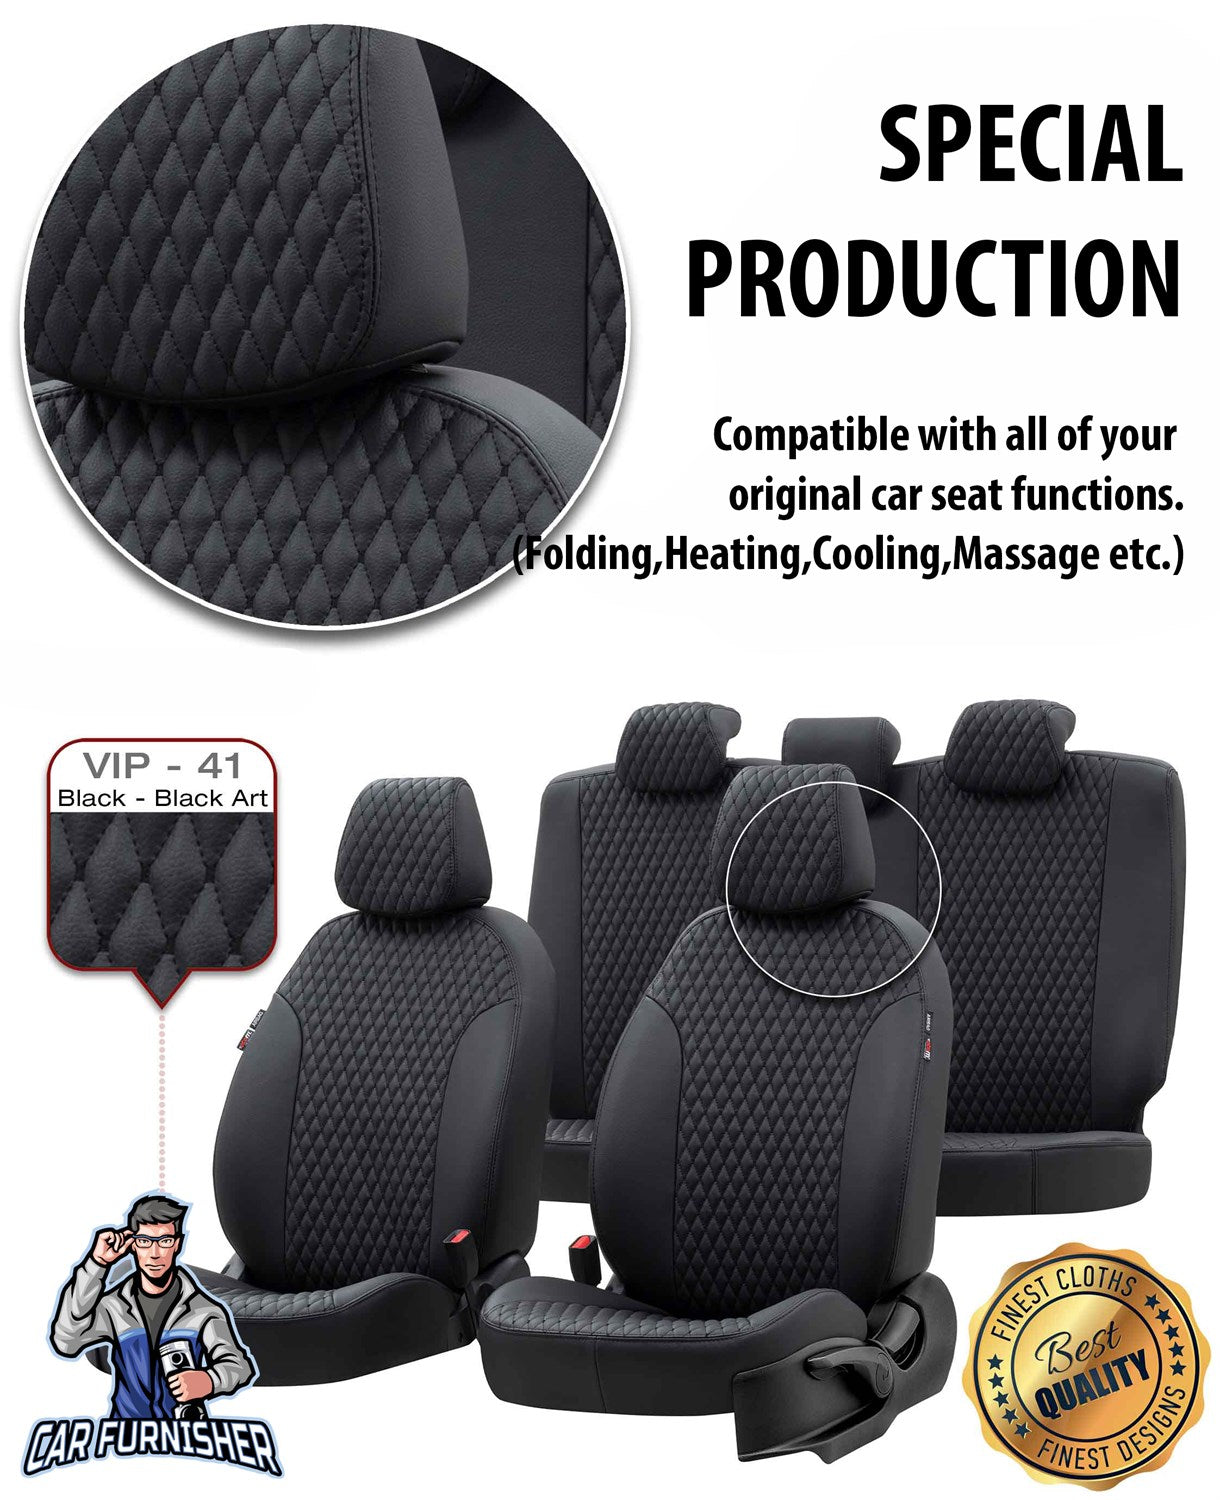 Fiat Fullback Seat Covers Amsterdam Leather Design Black Leather